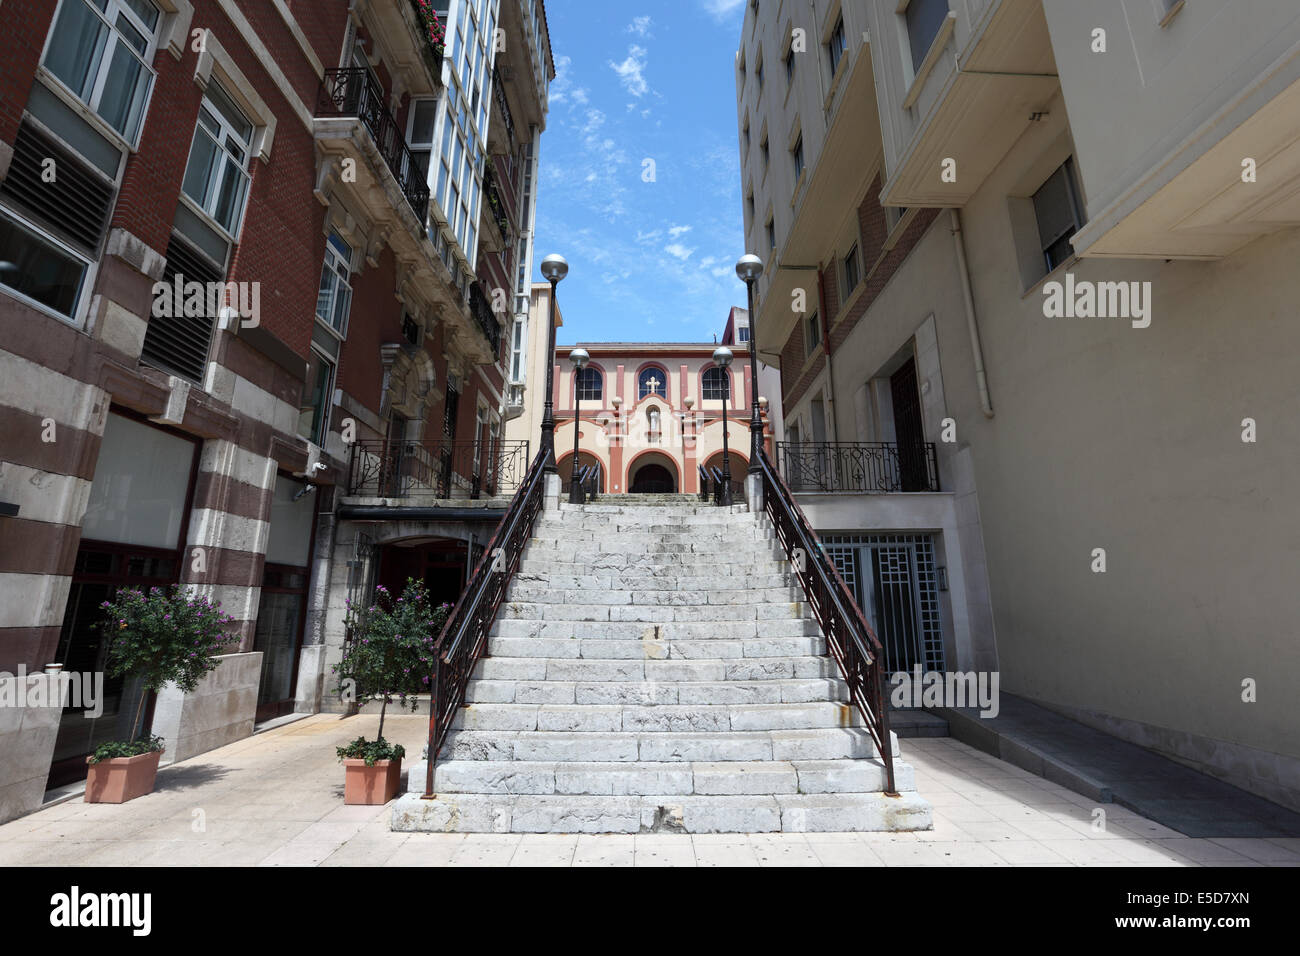 Street in Portugalete, Biscay province, Bilbao, Spain Stock Photo